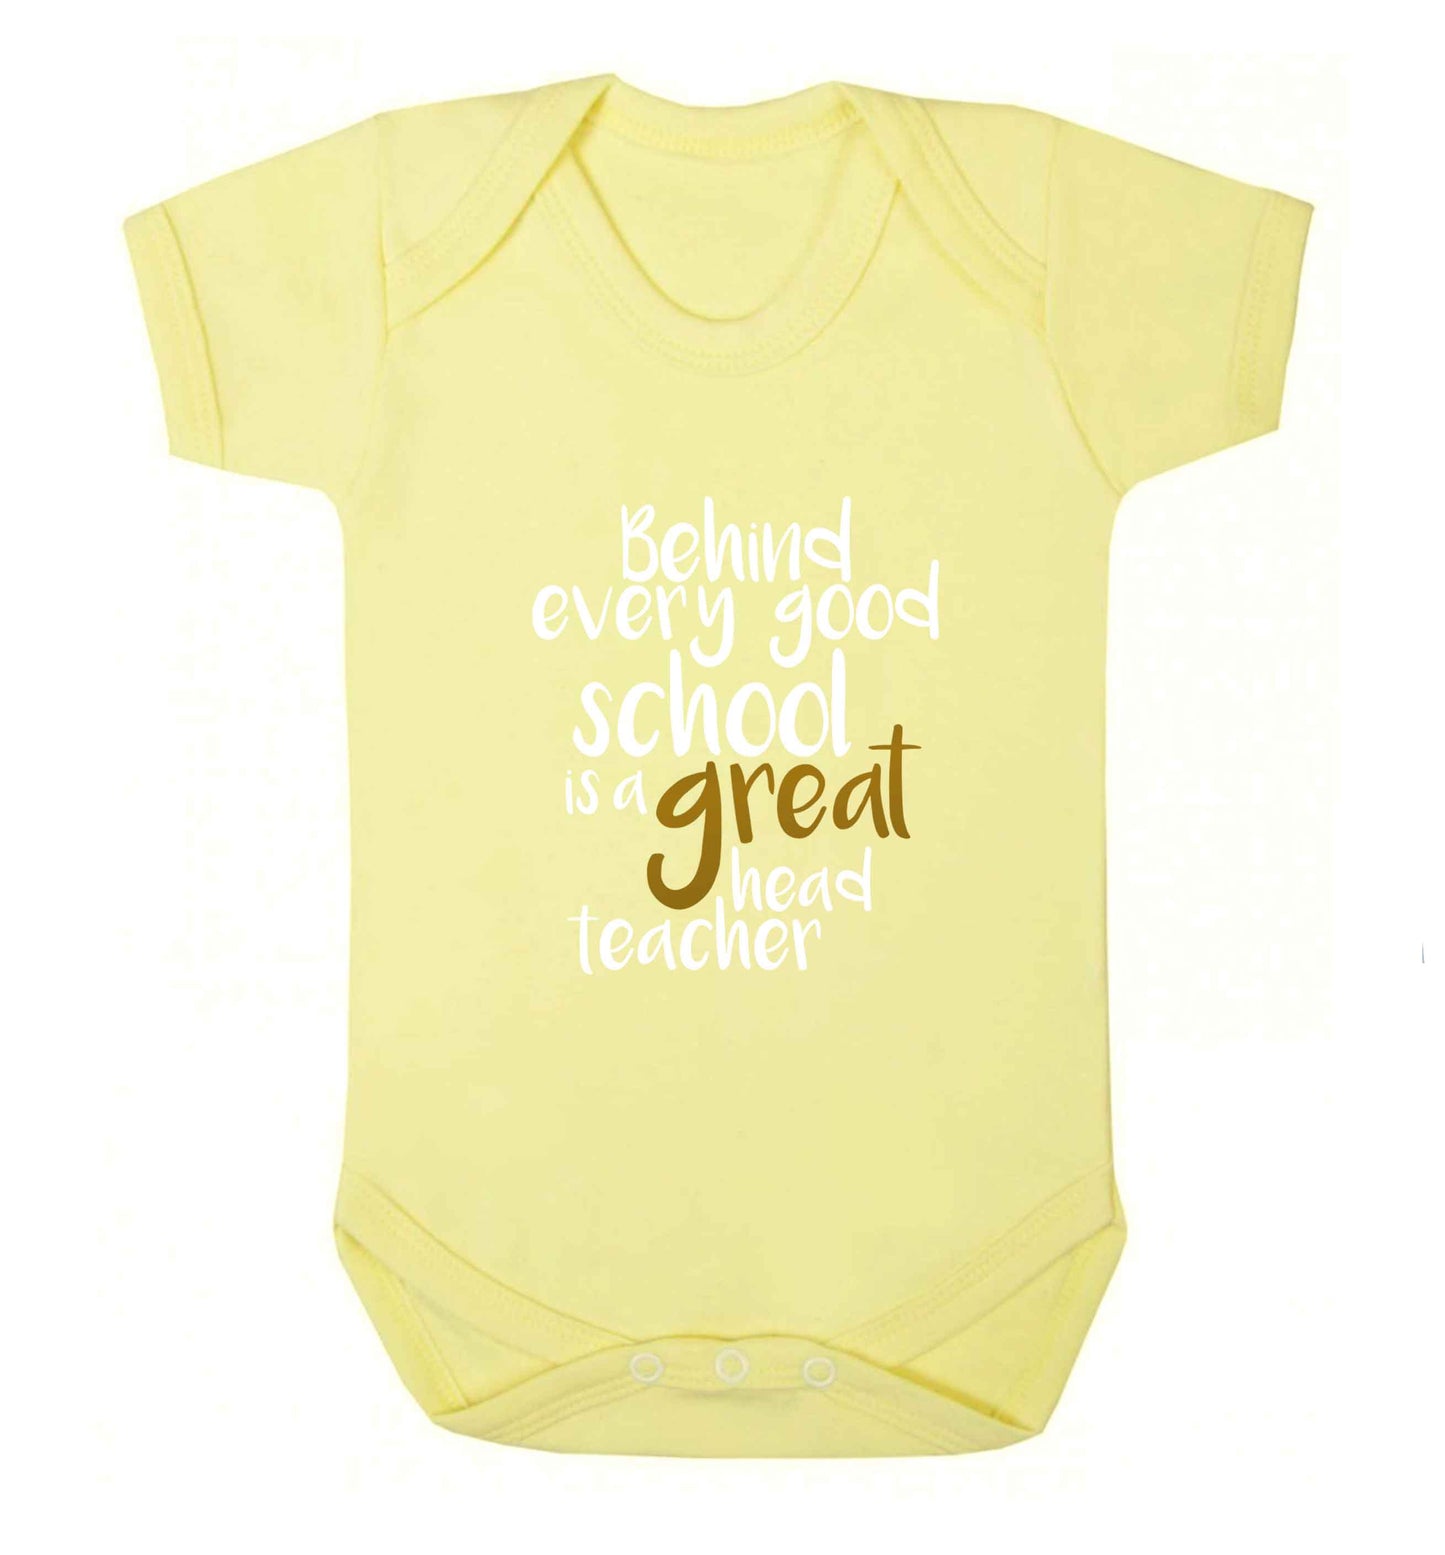 Behind every good school is a great head teacher baby vest pale yellow 18-24 months